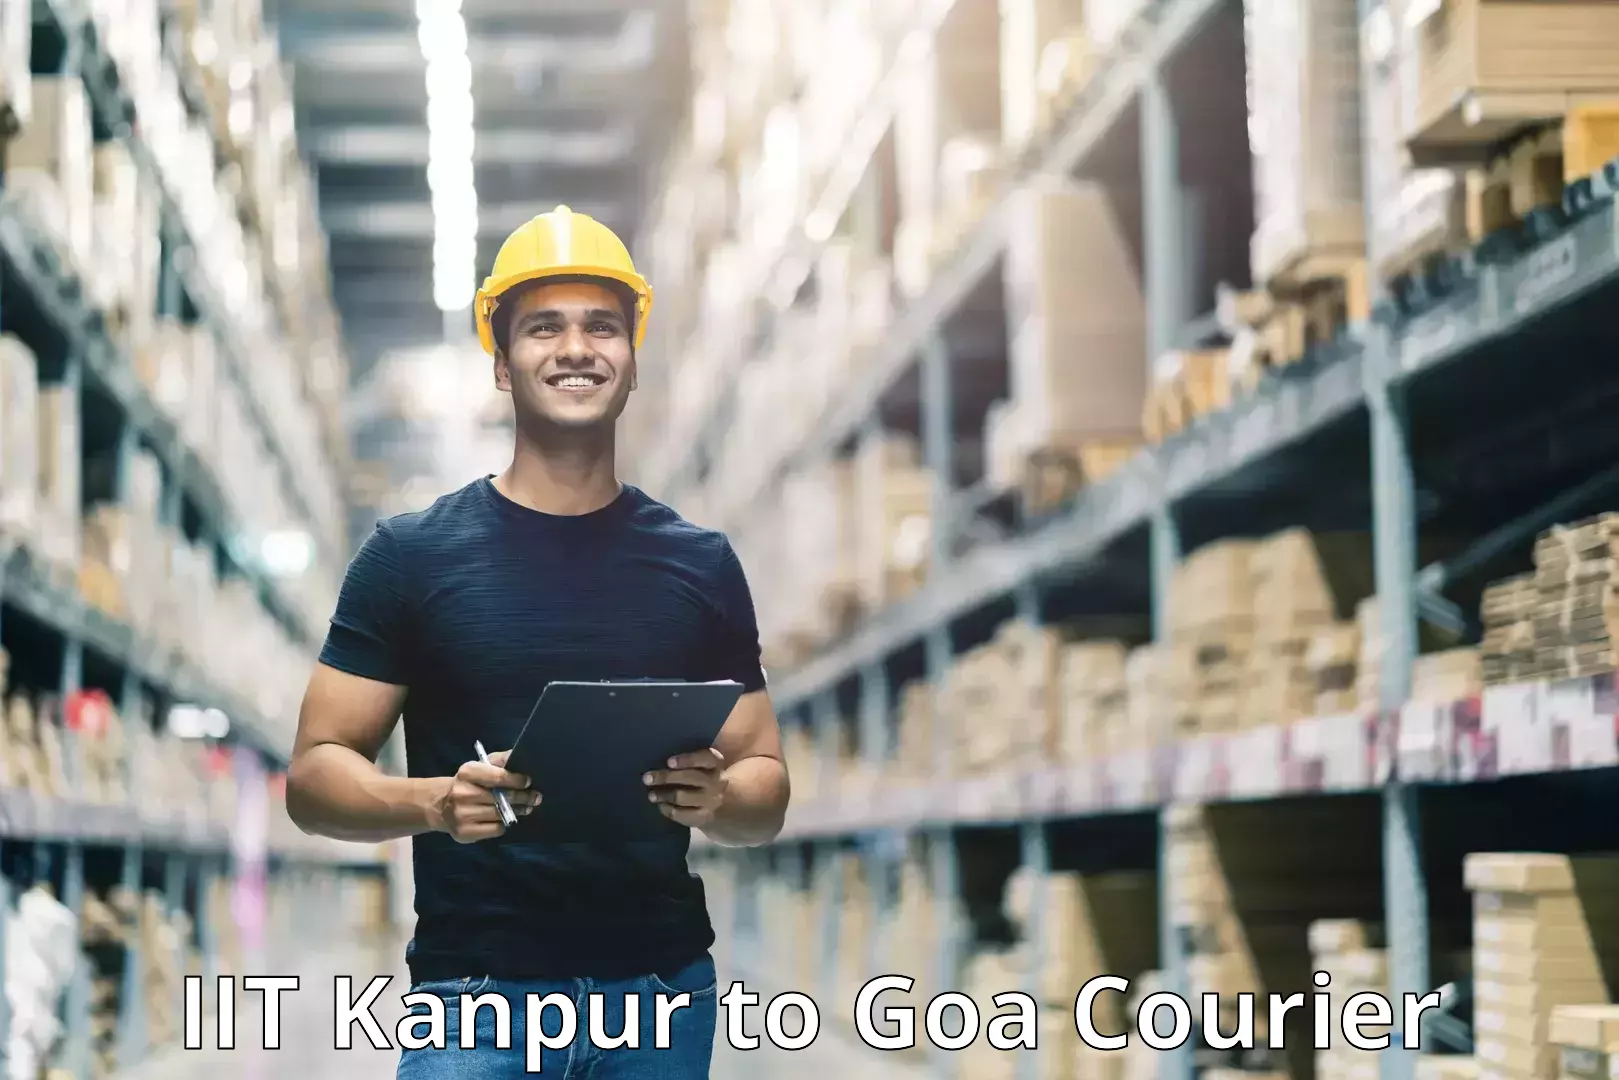 User-friendly delivery service IIT Kanpur to NIT Goa